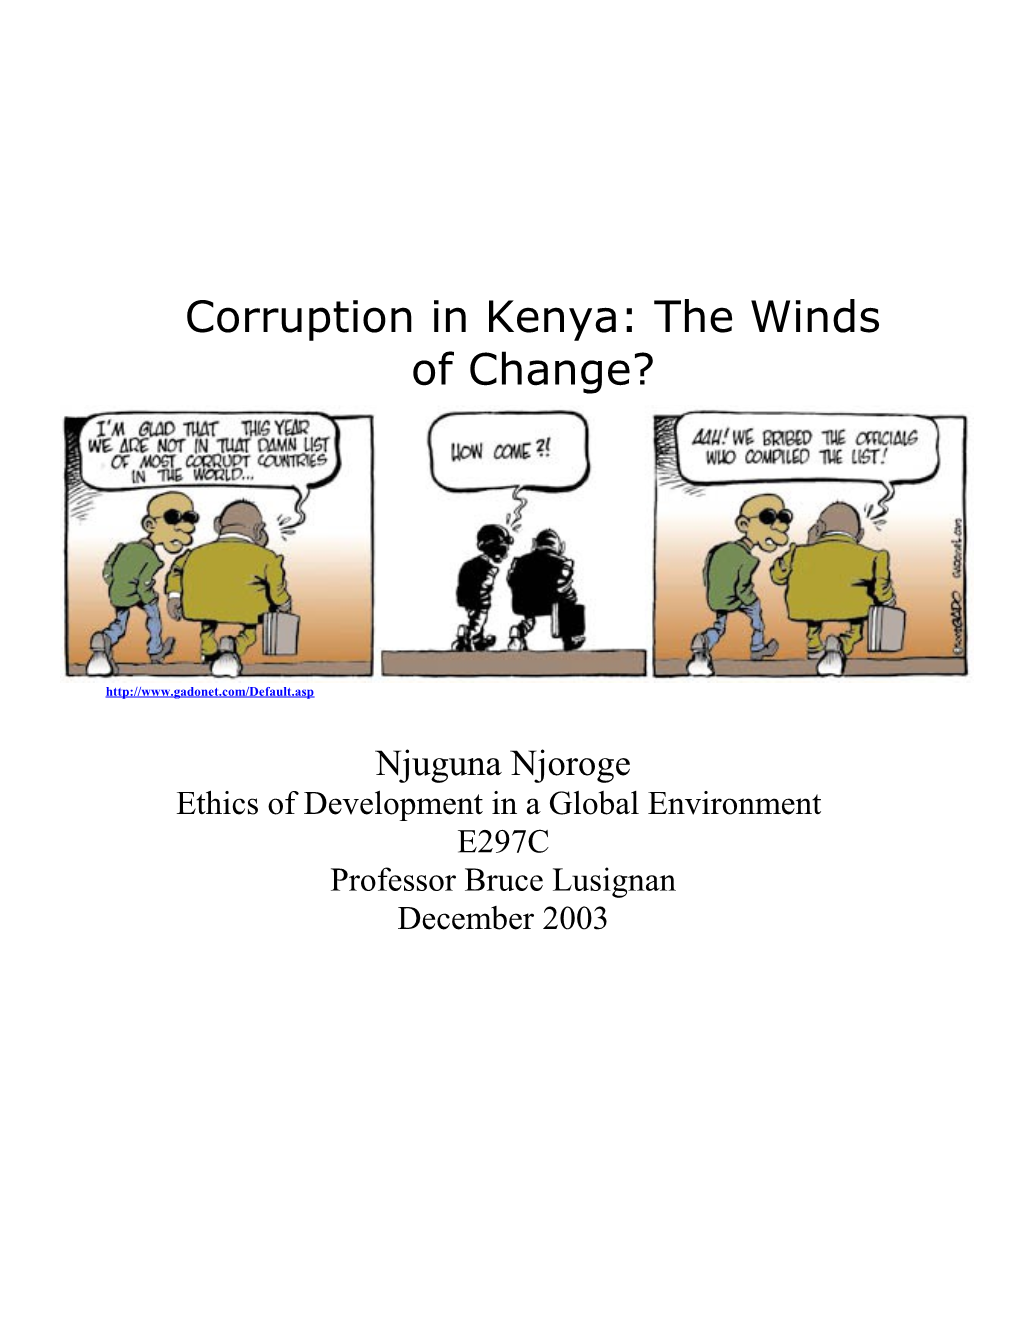 Corruption in Kenya: the Winds of Change?